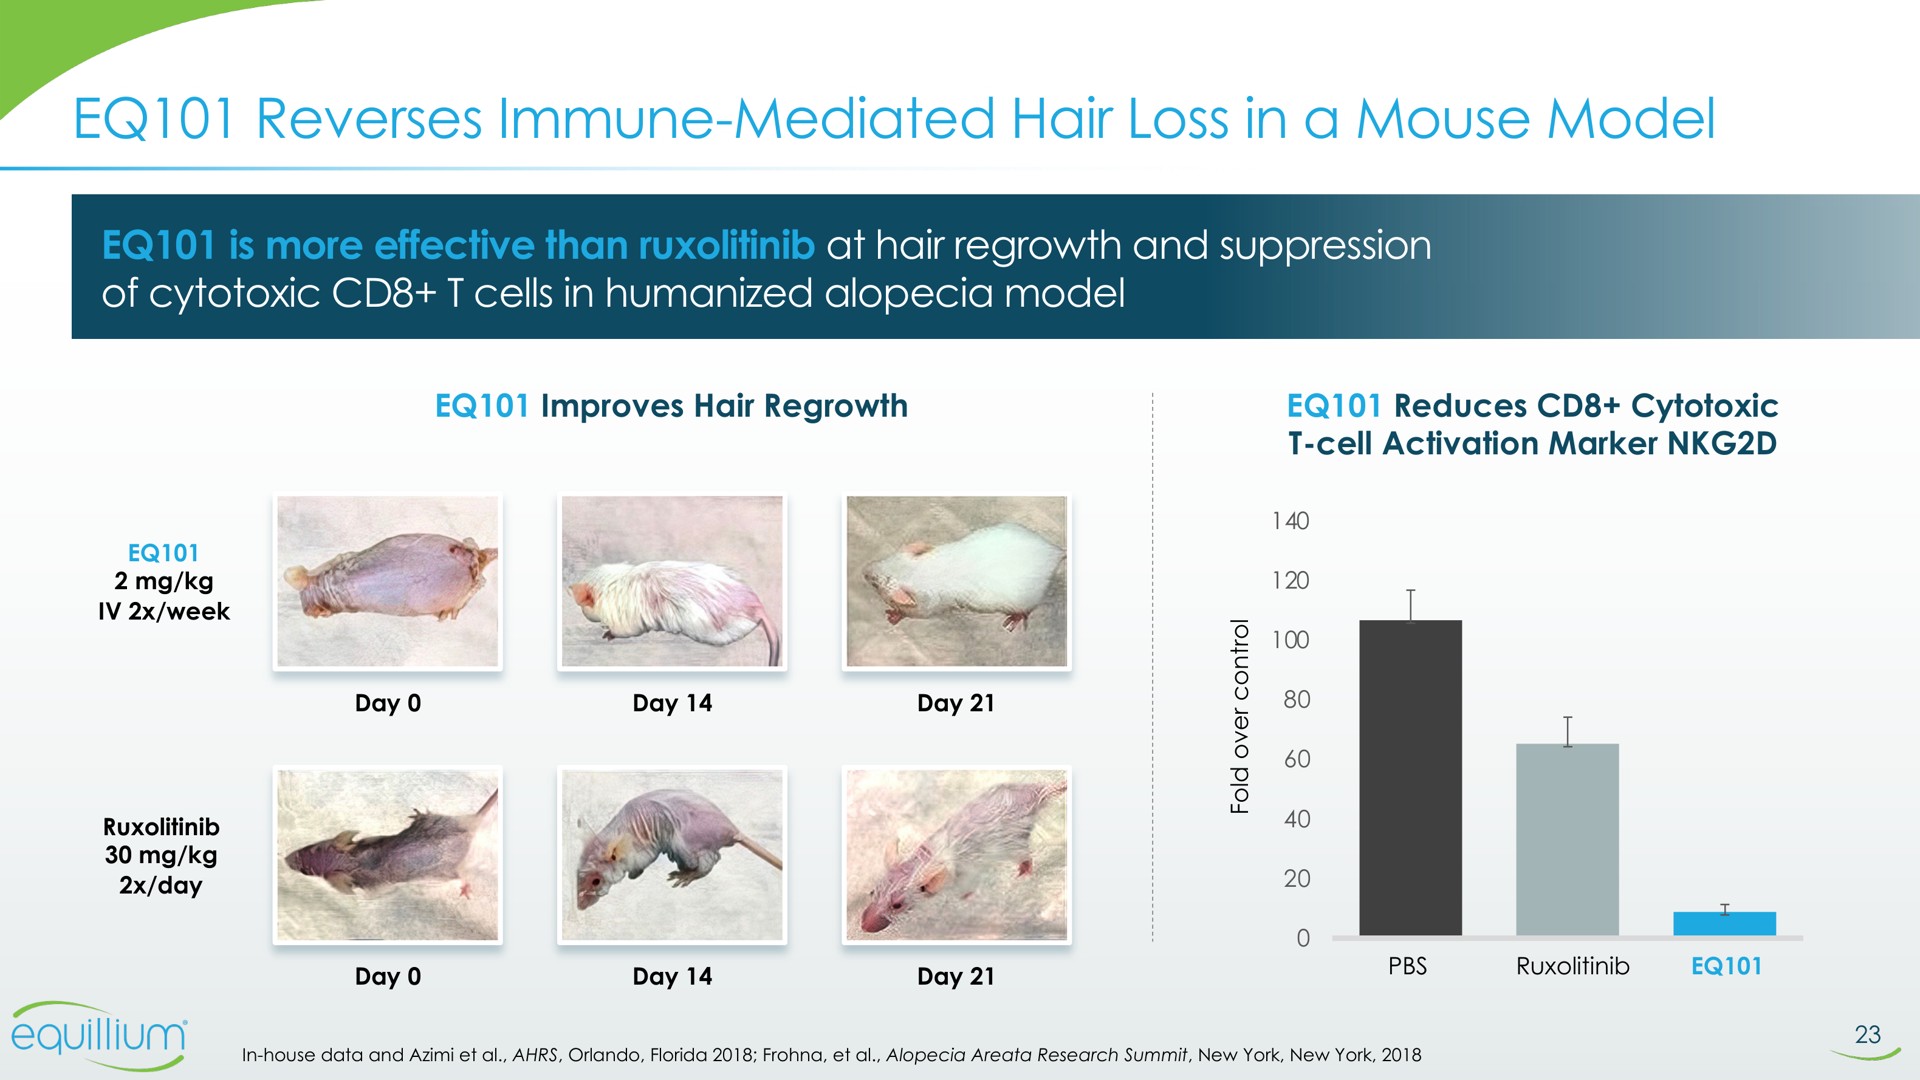 reverses immune mediated hair loss in a mouse model | Equillium